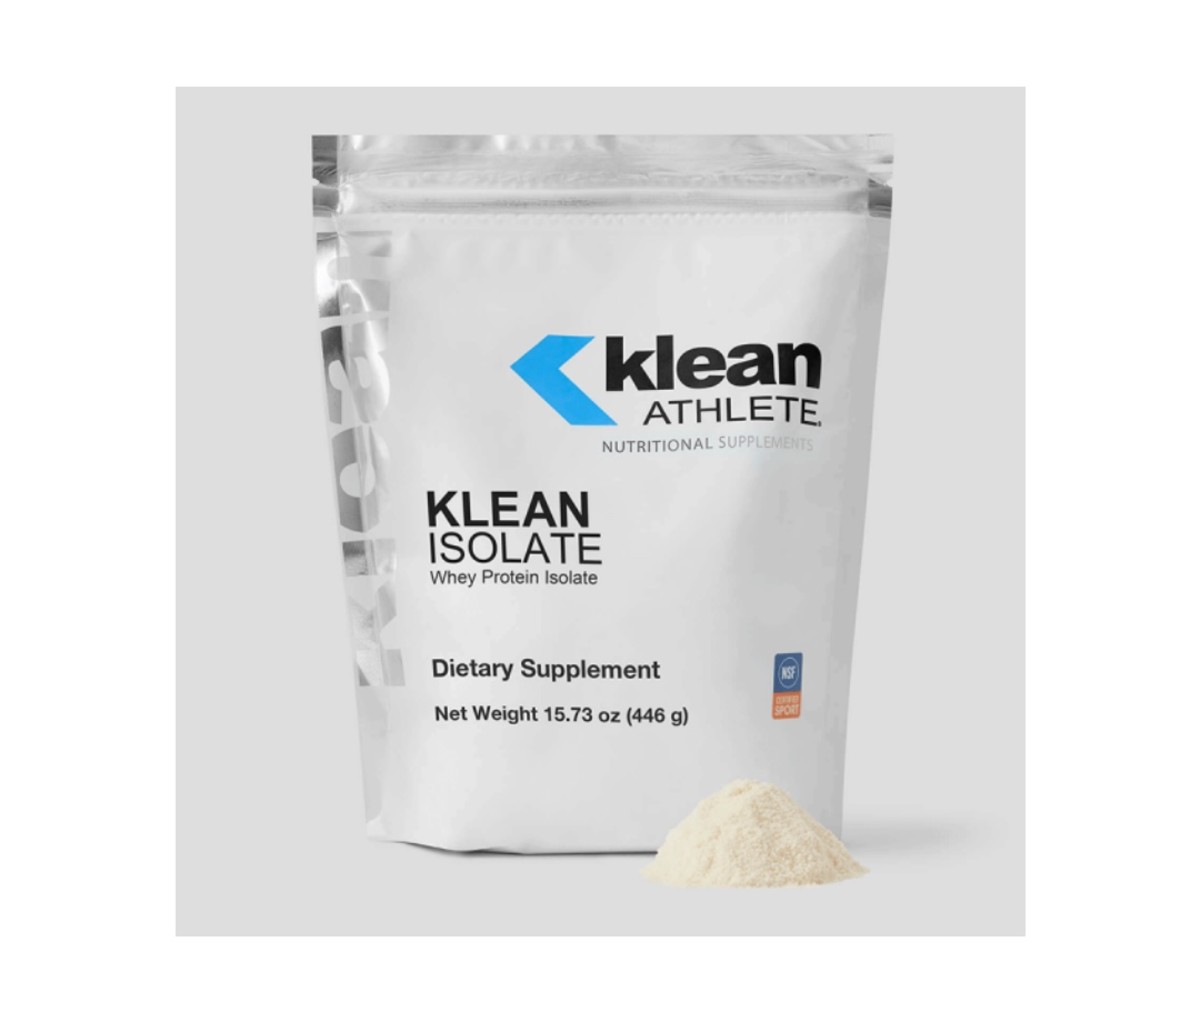 Klean Athlete Isolate is one of the clean protein powder in the market that contains only two ingredients: whey protein isolate and sunflower lecithin (a necessary stabilizer).